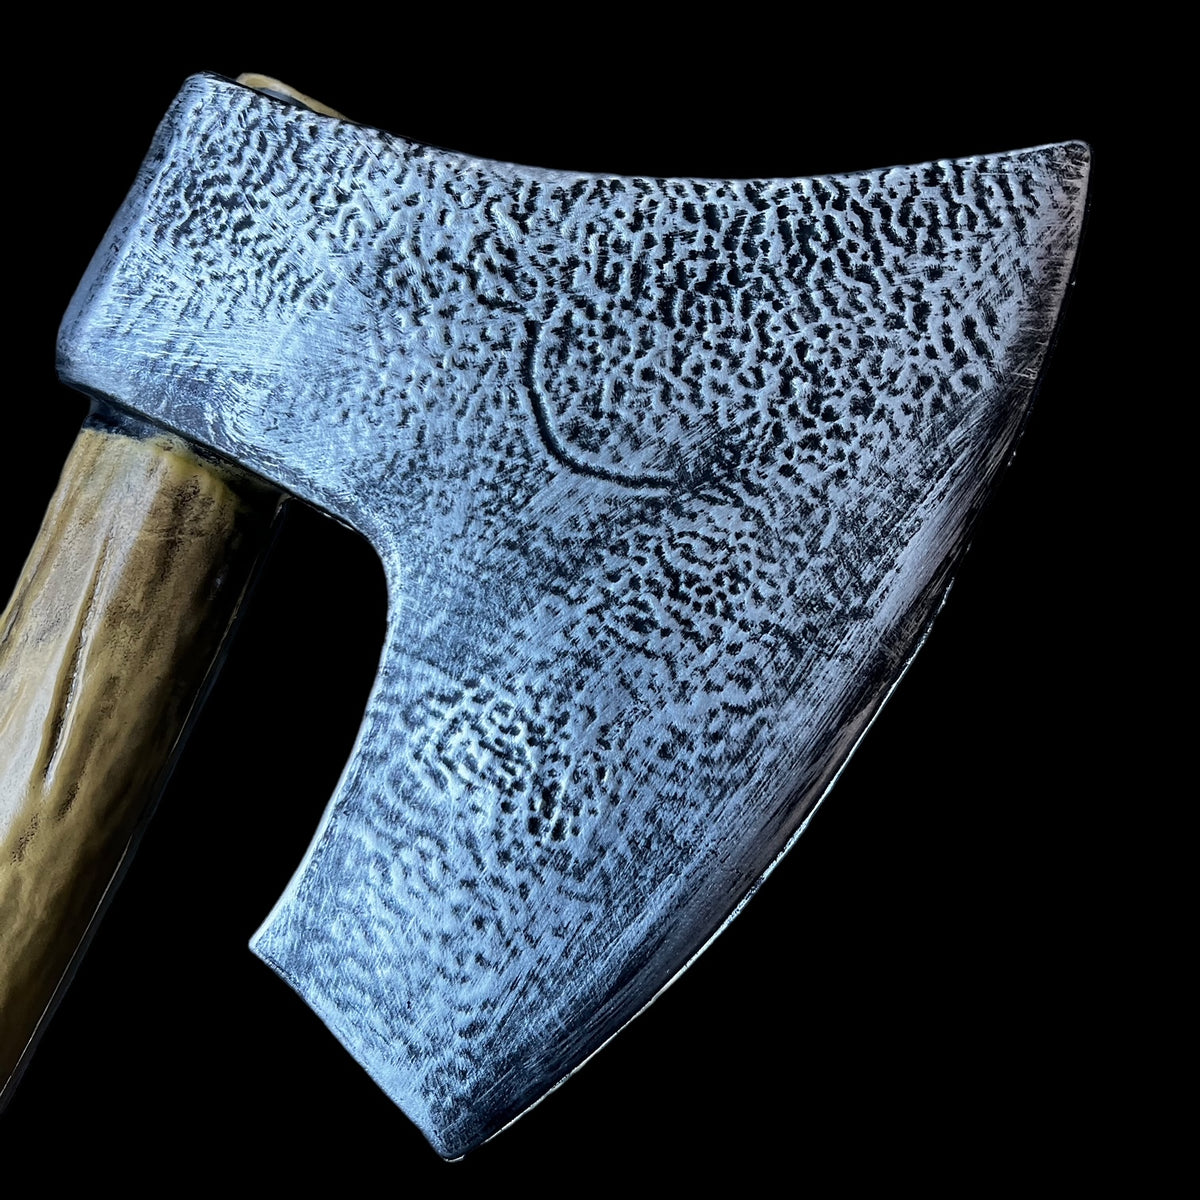 Founders Carver Axe